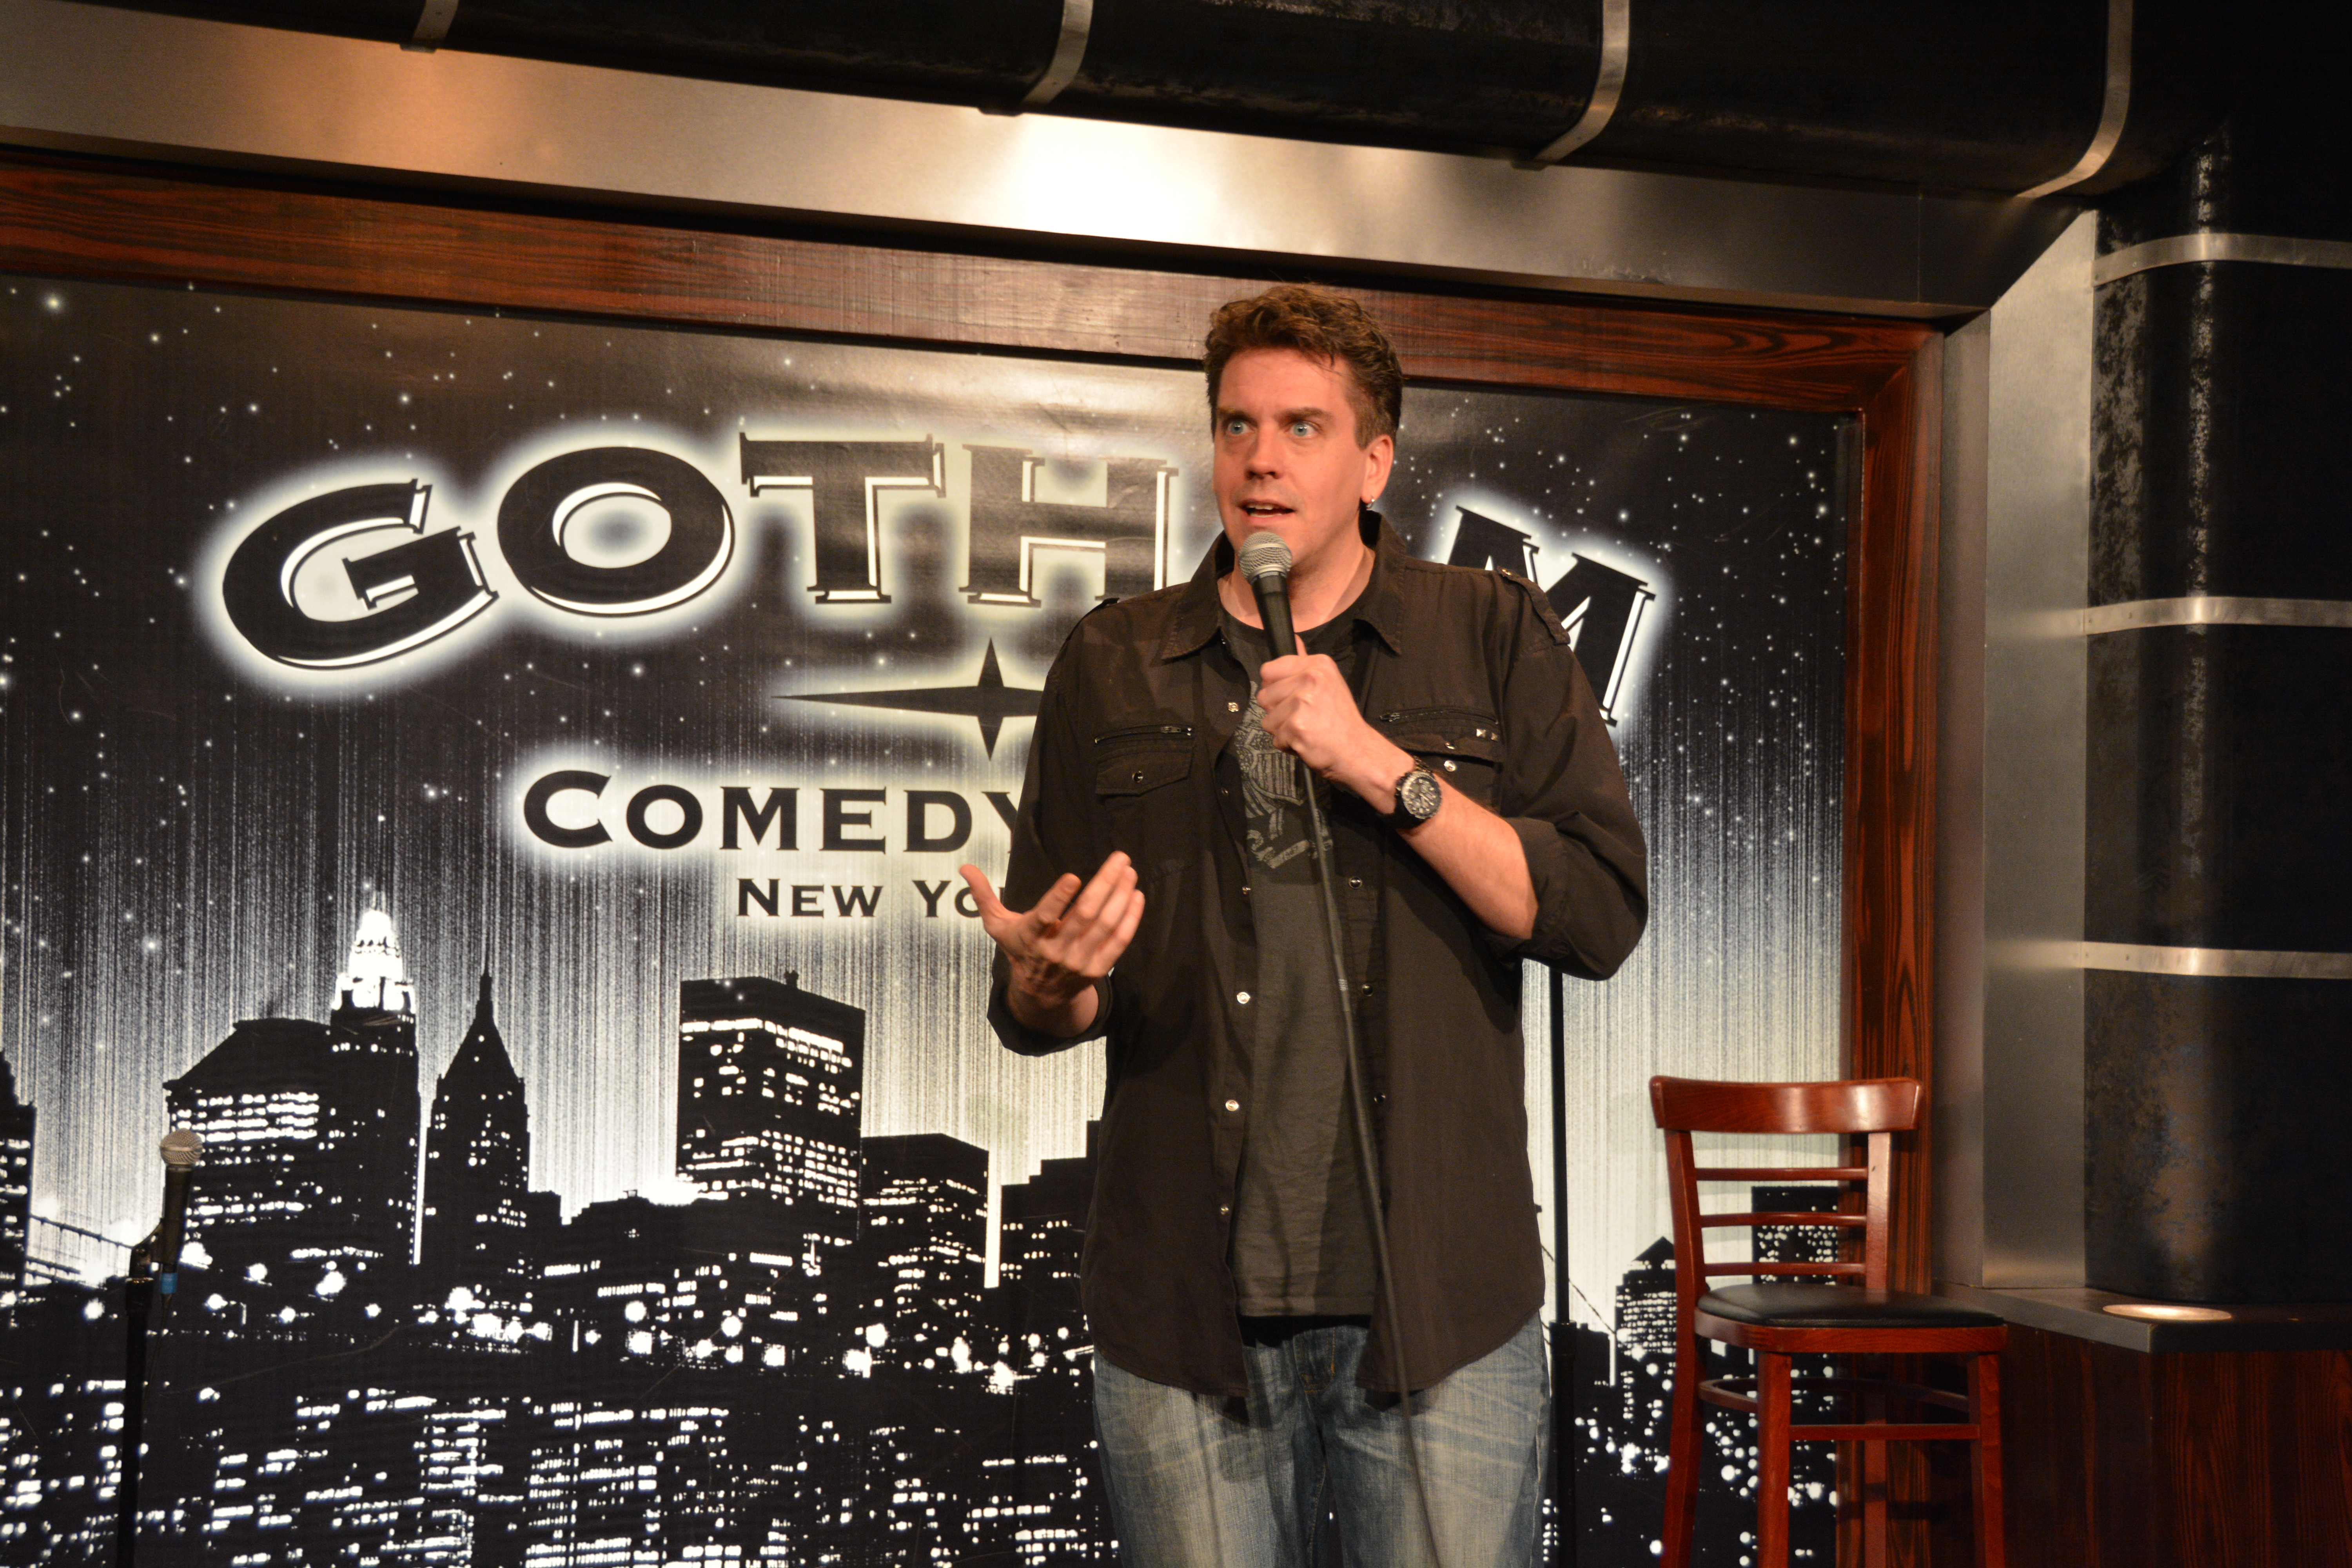 Jesse Joyce performing at Gotham Comedy Club in New York City